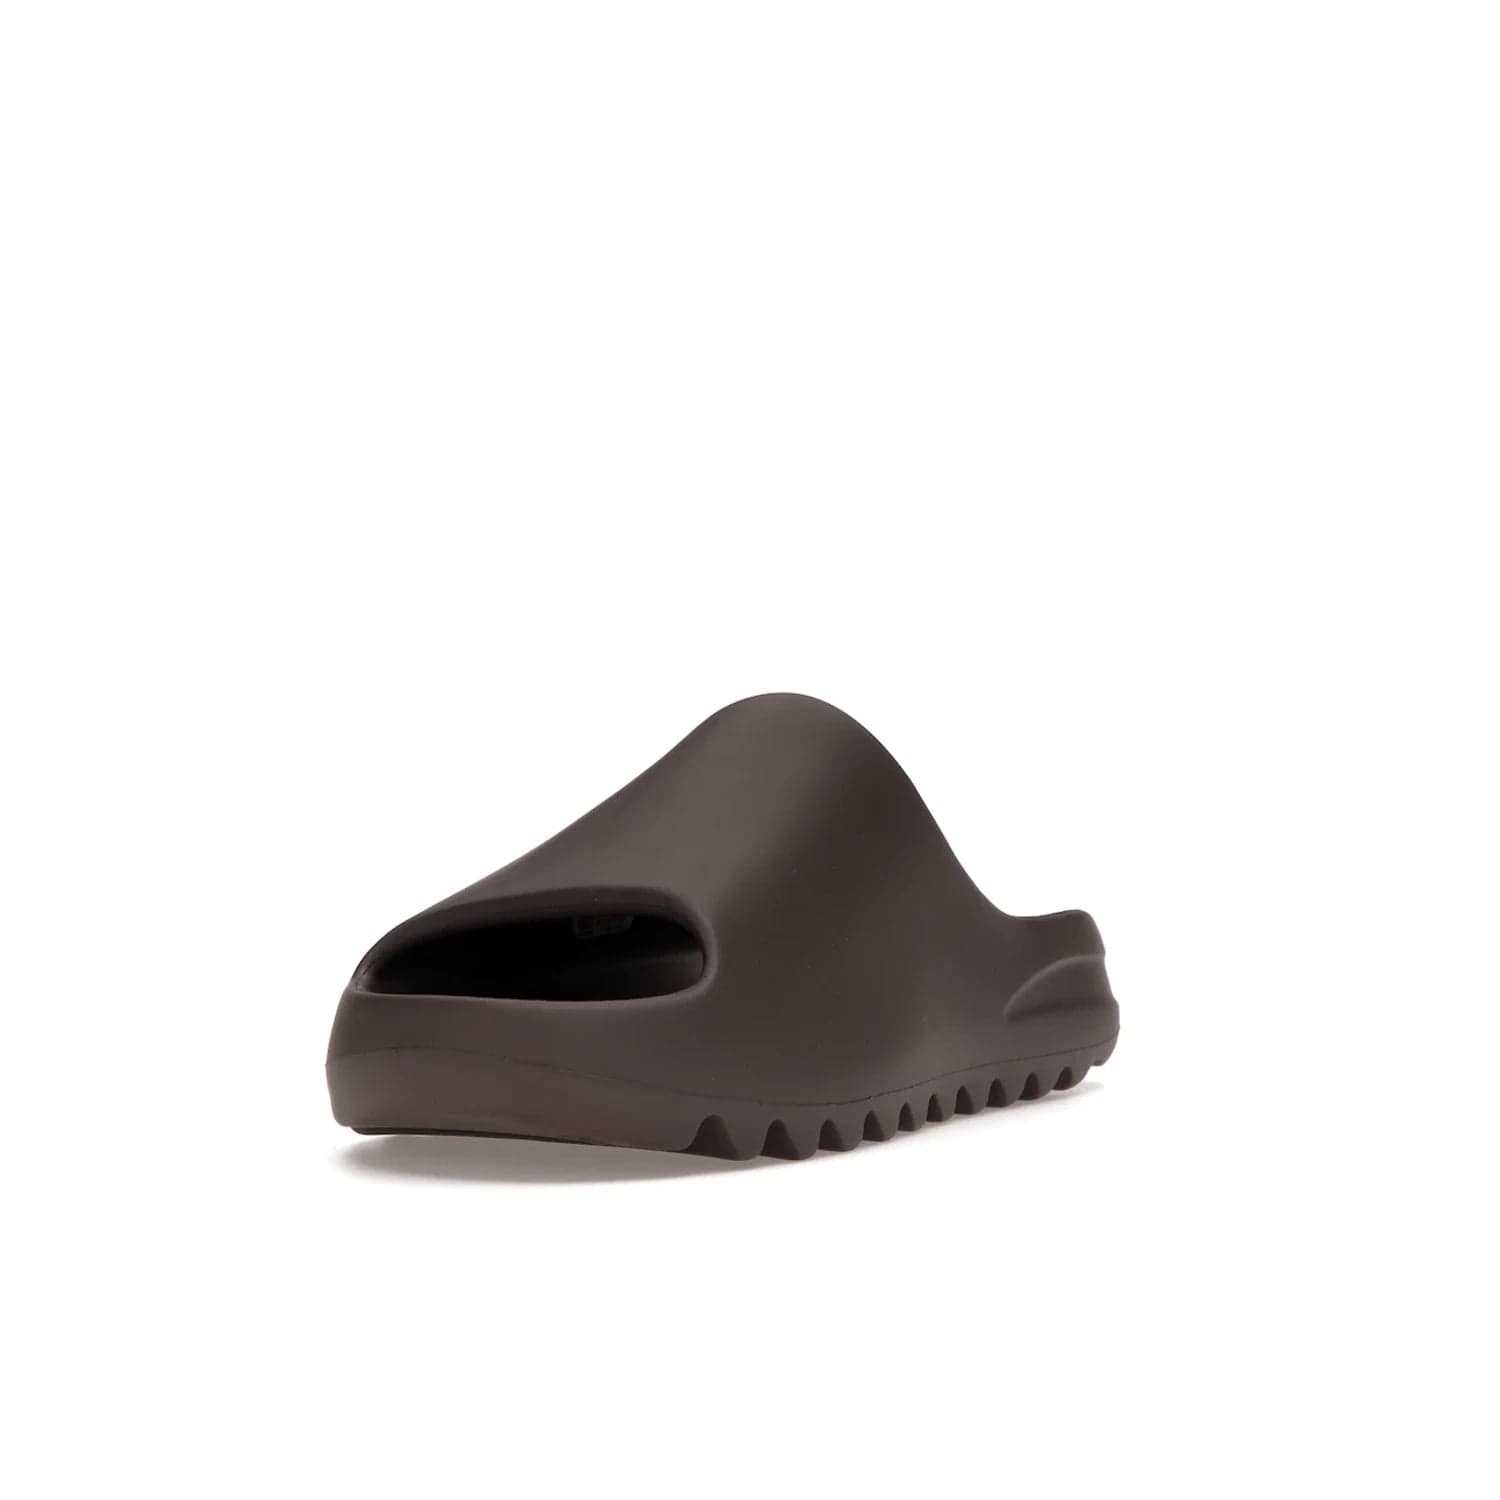 adidas Yeezy Slide Soot - Image 13 - Only at www.BallersClubKickz.com - Shop the Yeezy Slide Soot sneaker by Adidas, a sleek blend of form and function. Monochrome silhouette in Soot/Soot/Soot. Lightweight EVA foam offers comfort and durability. Get the must-have style today.